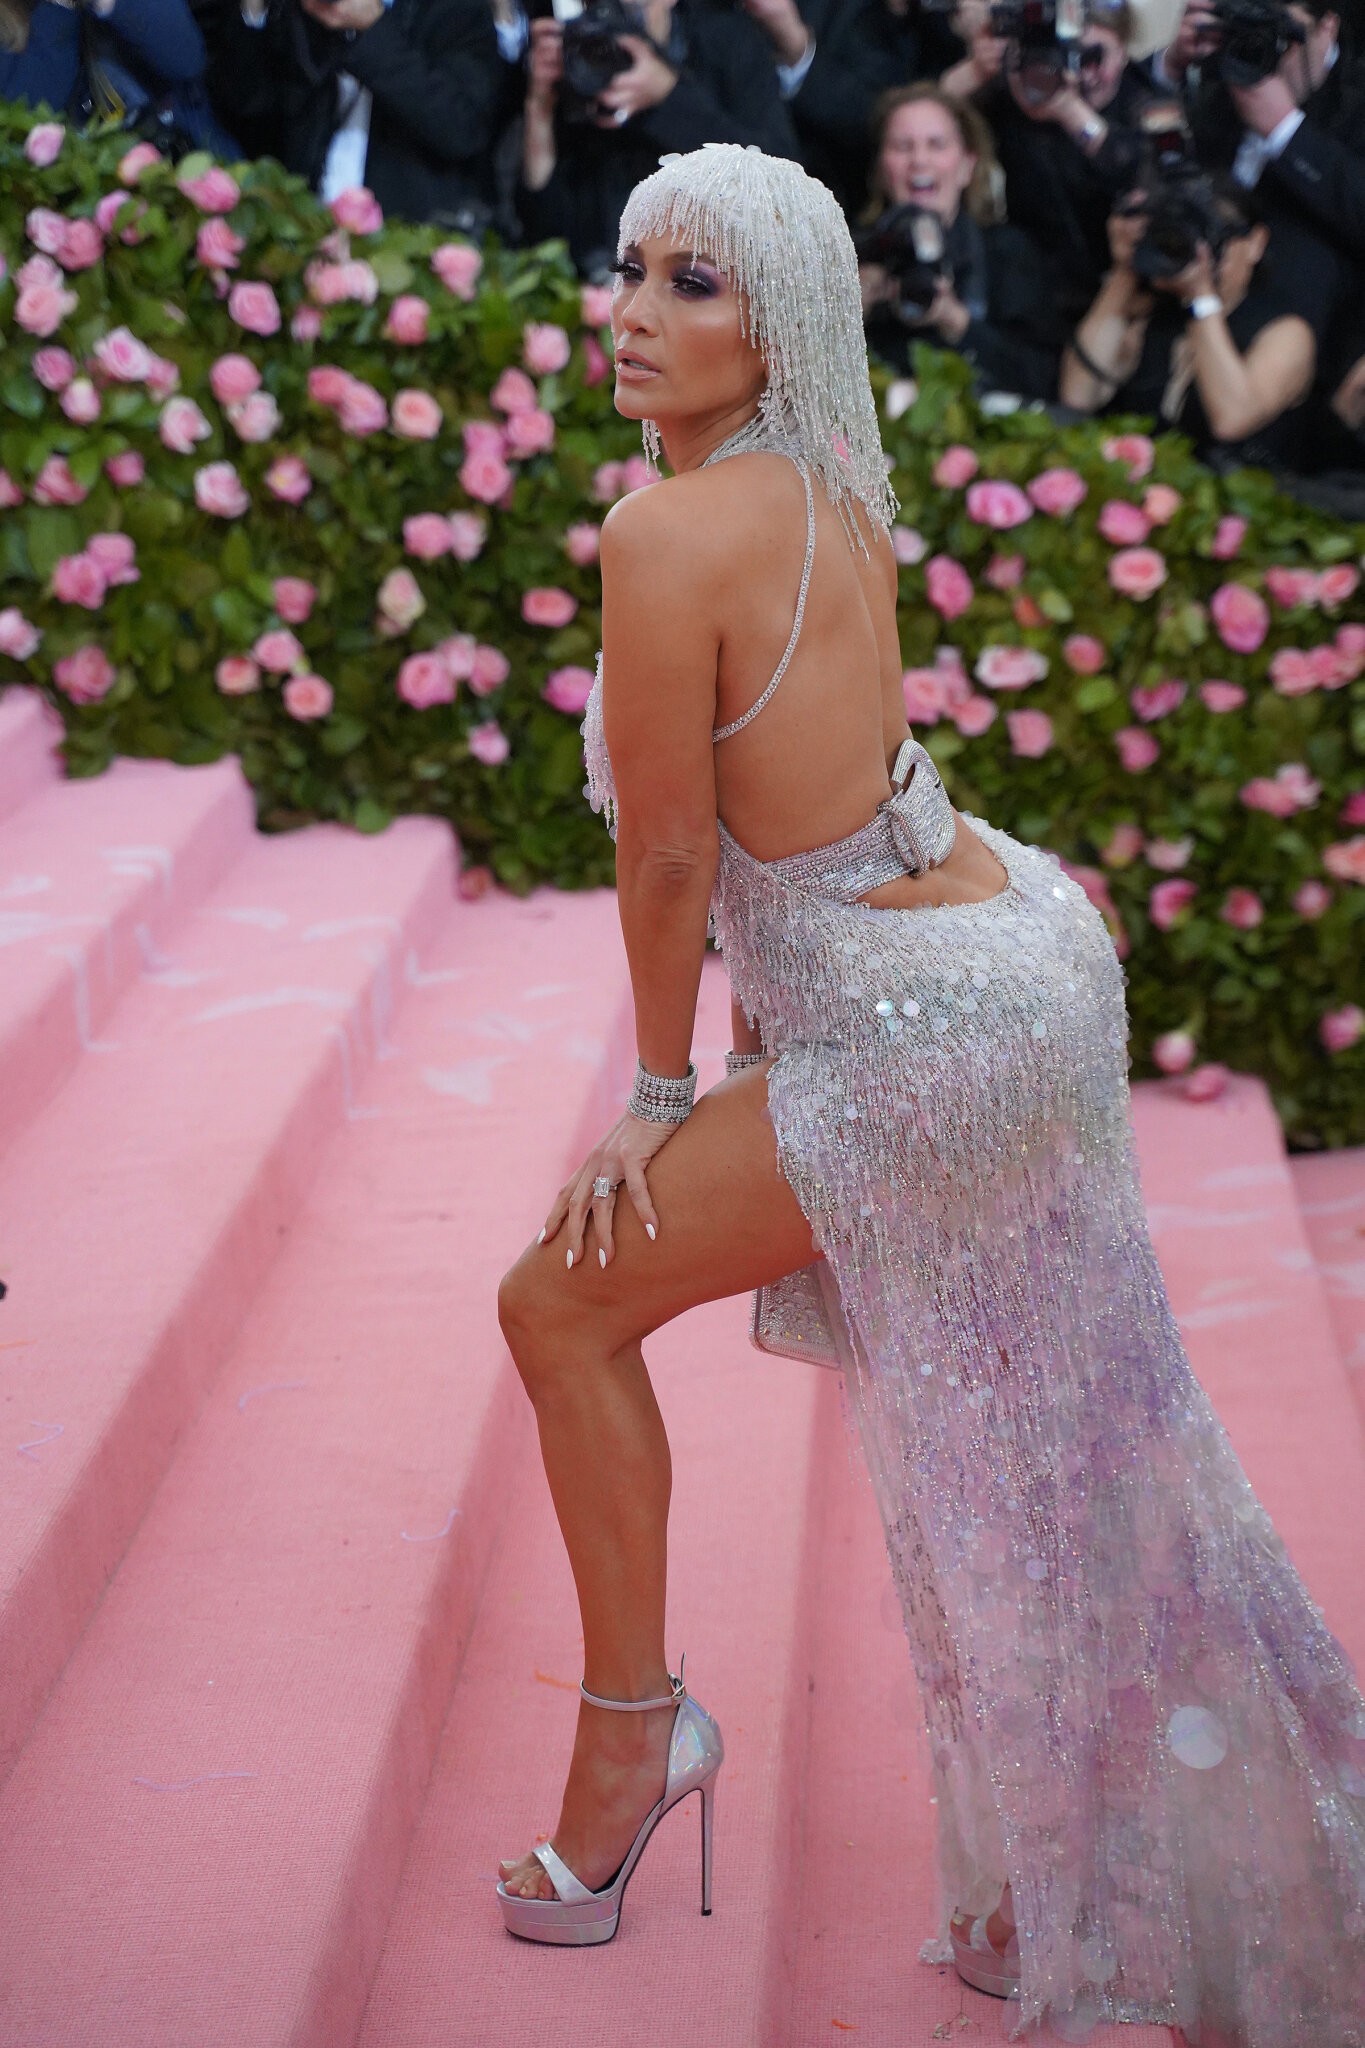 Jennifer Lopez back in Versace for "Camp: Notes on Fashion" at the 2019 Met Gala